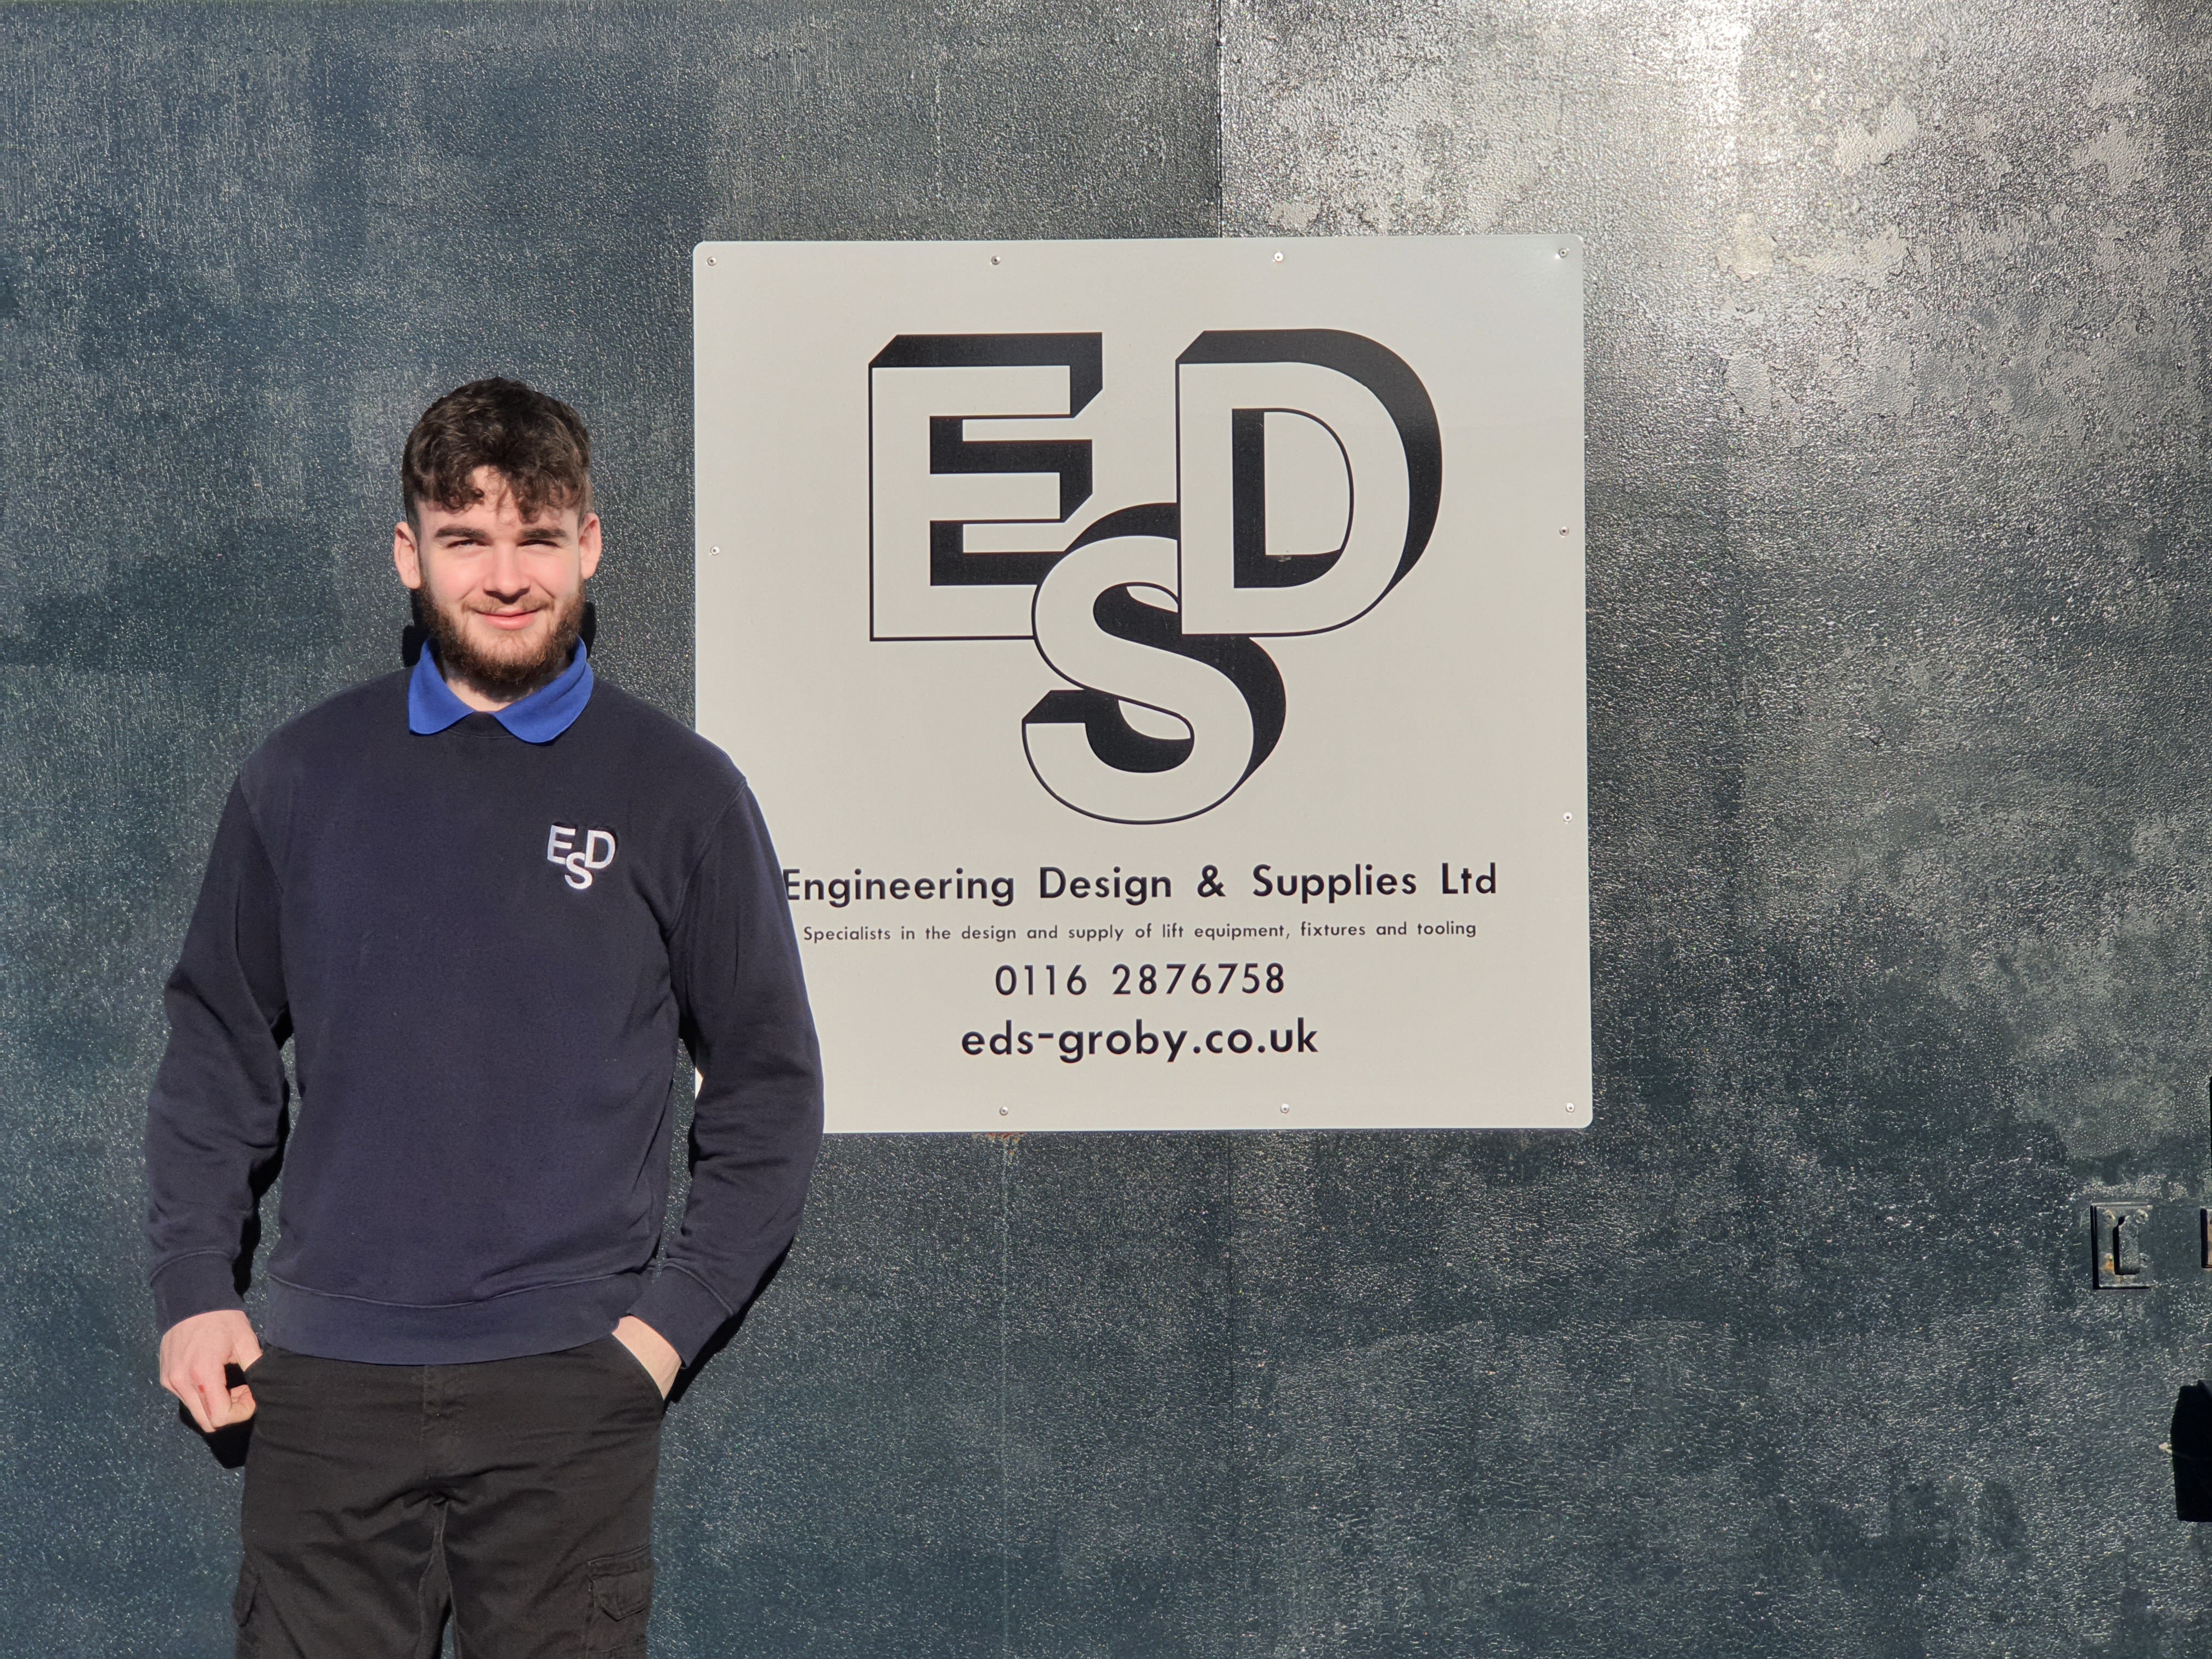 Mason Mckeown, Apprentice Engineer at EDS in Leicestershire